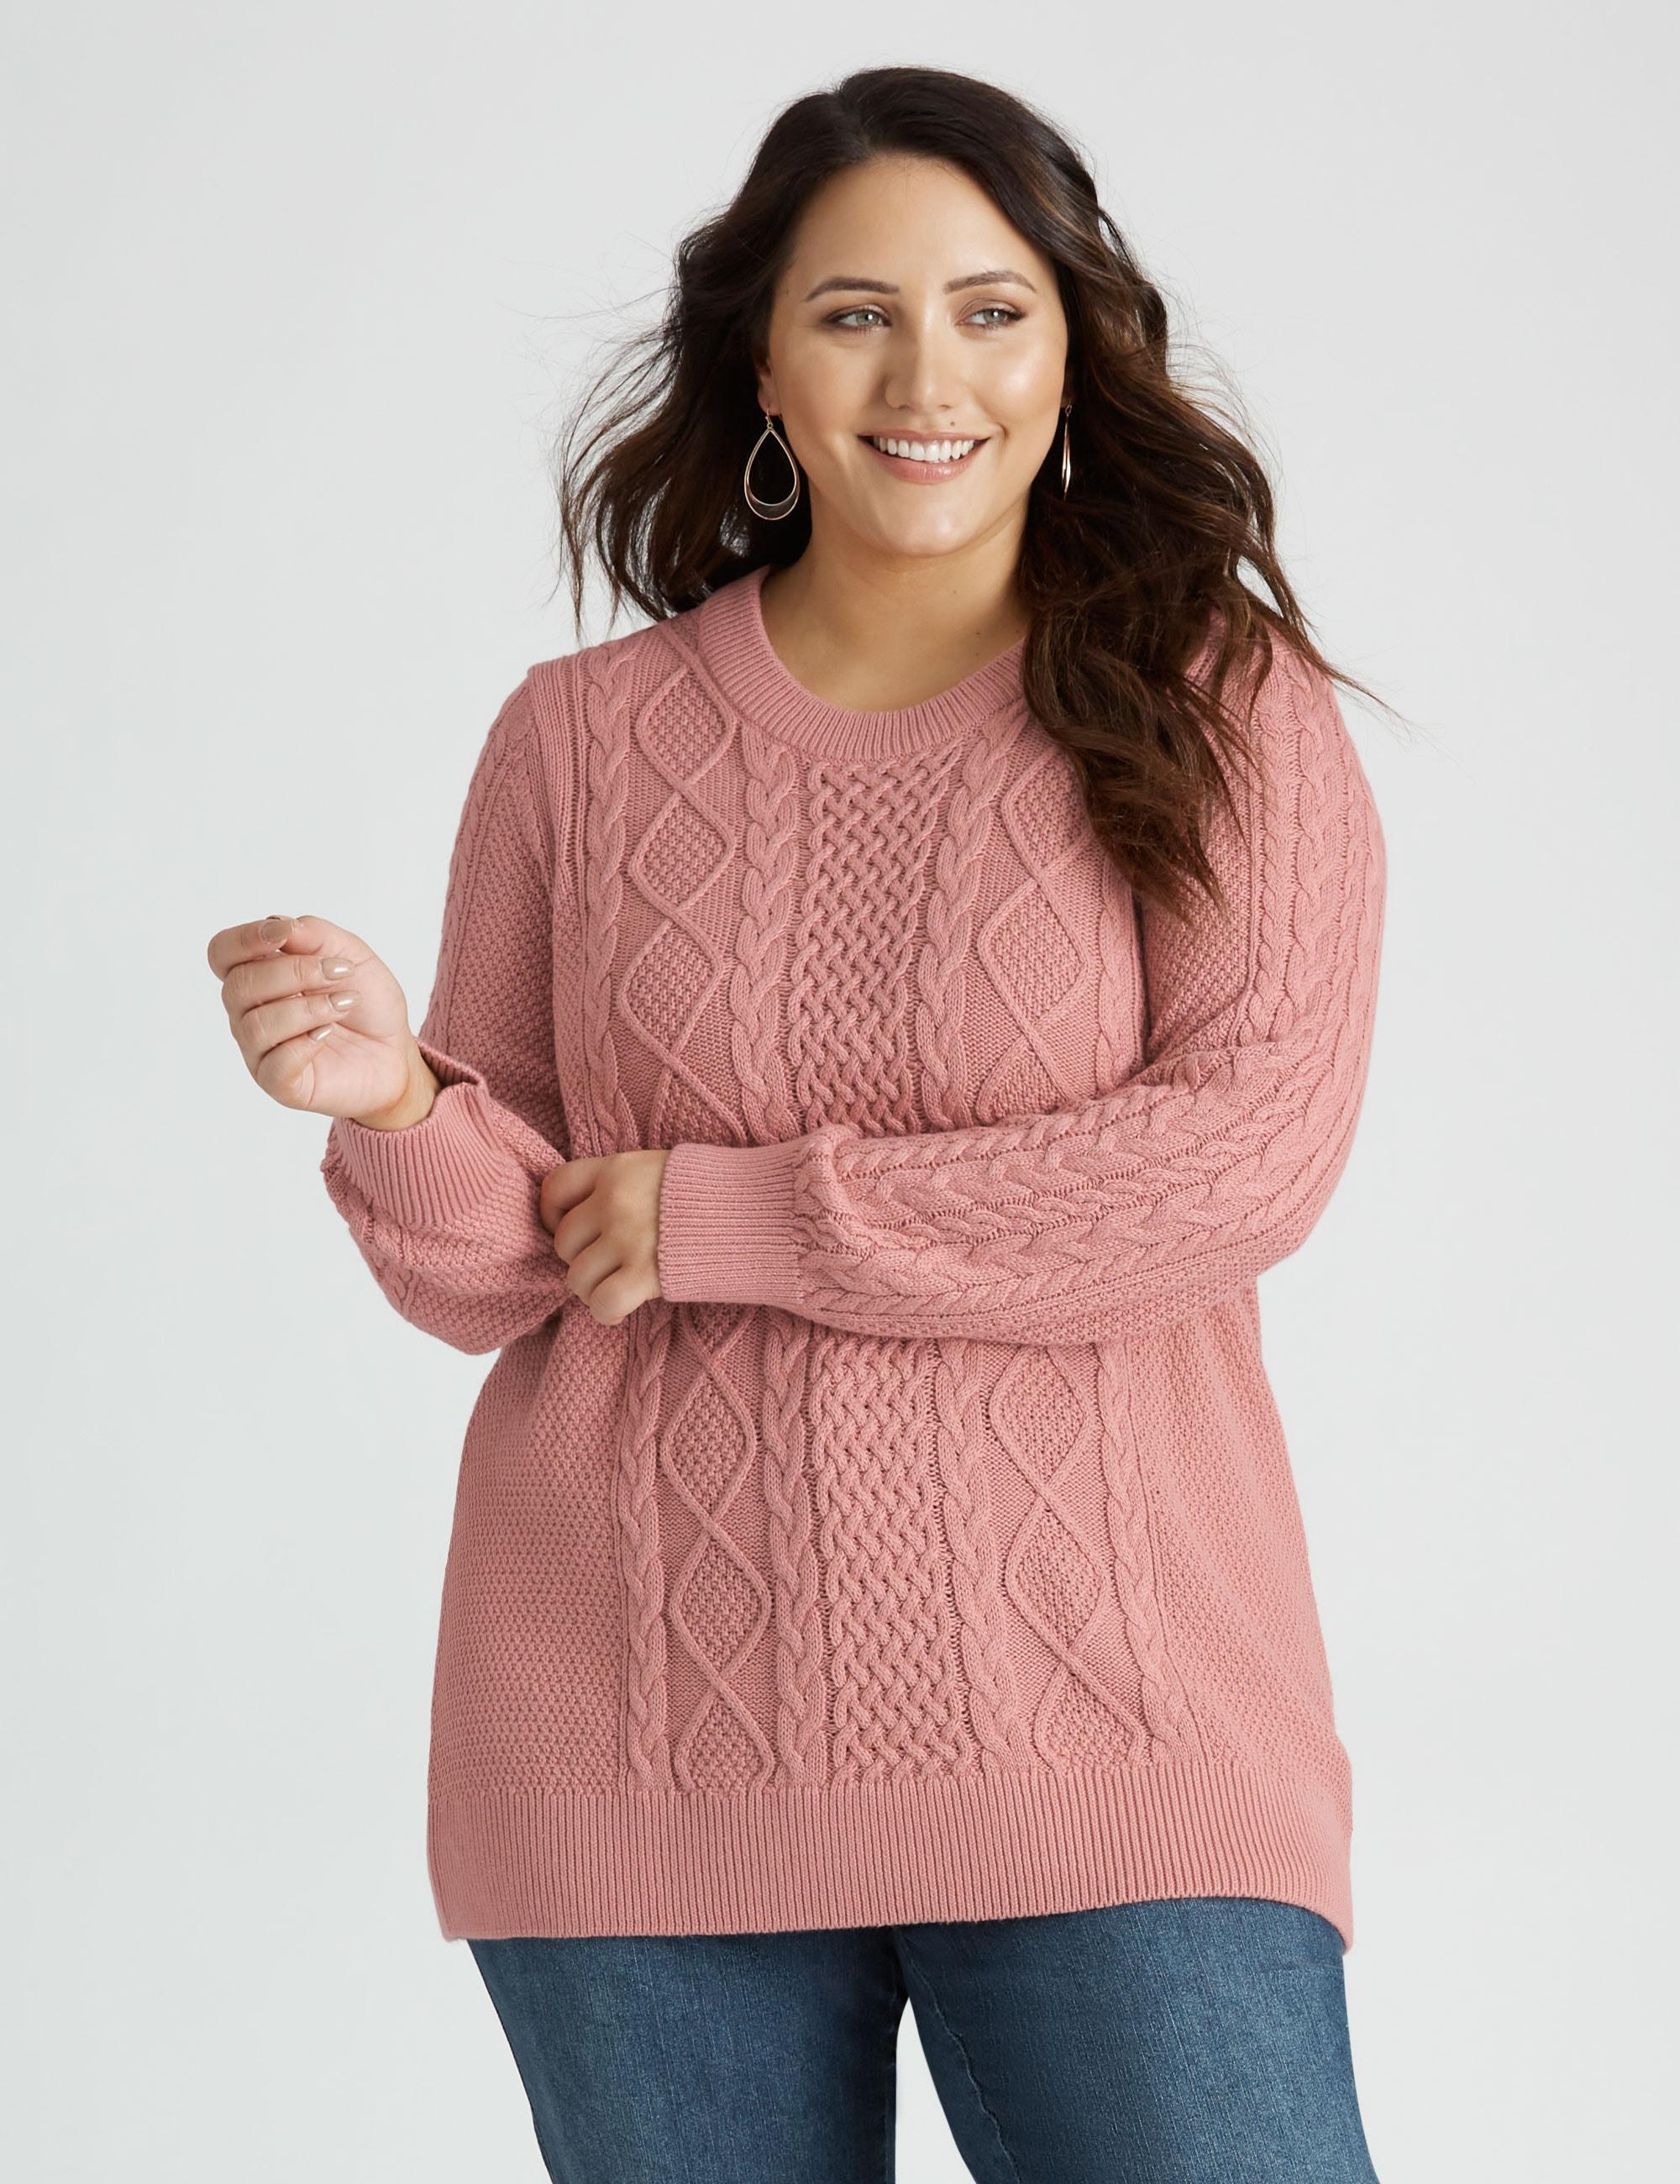 BeMe - Plus Size - Womens Jumper - Long Sleeve Cable Knit Jumper